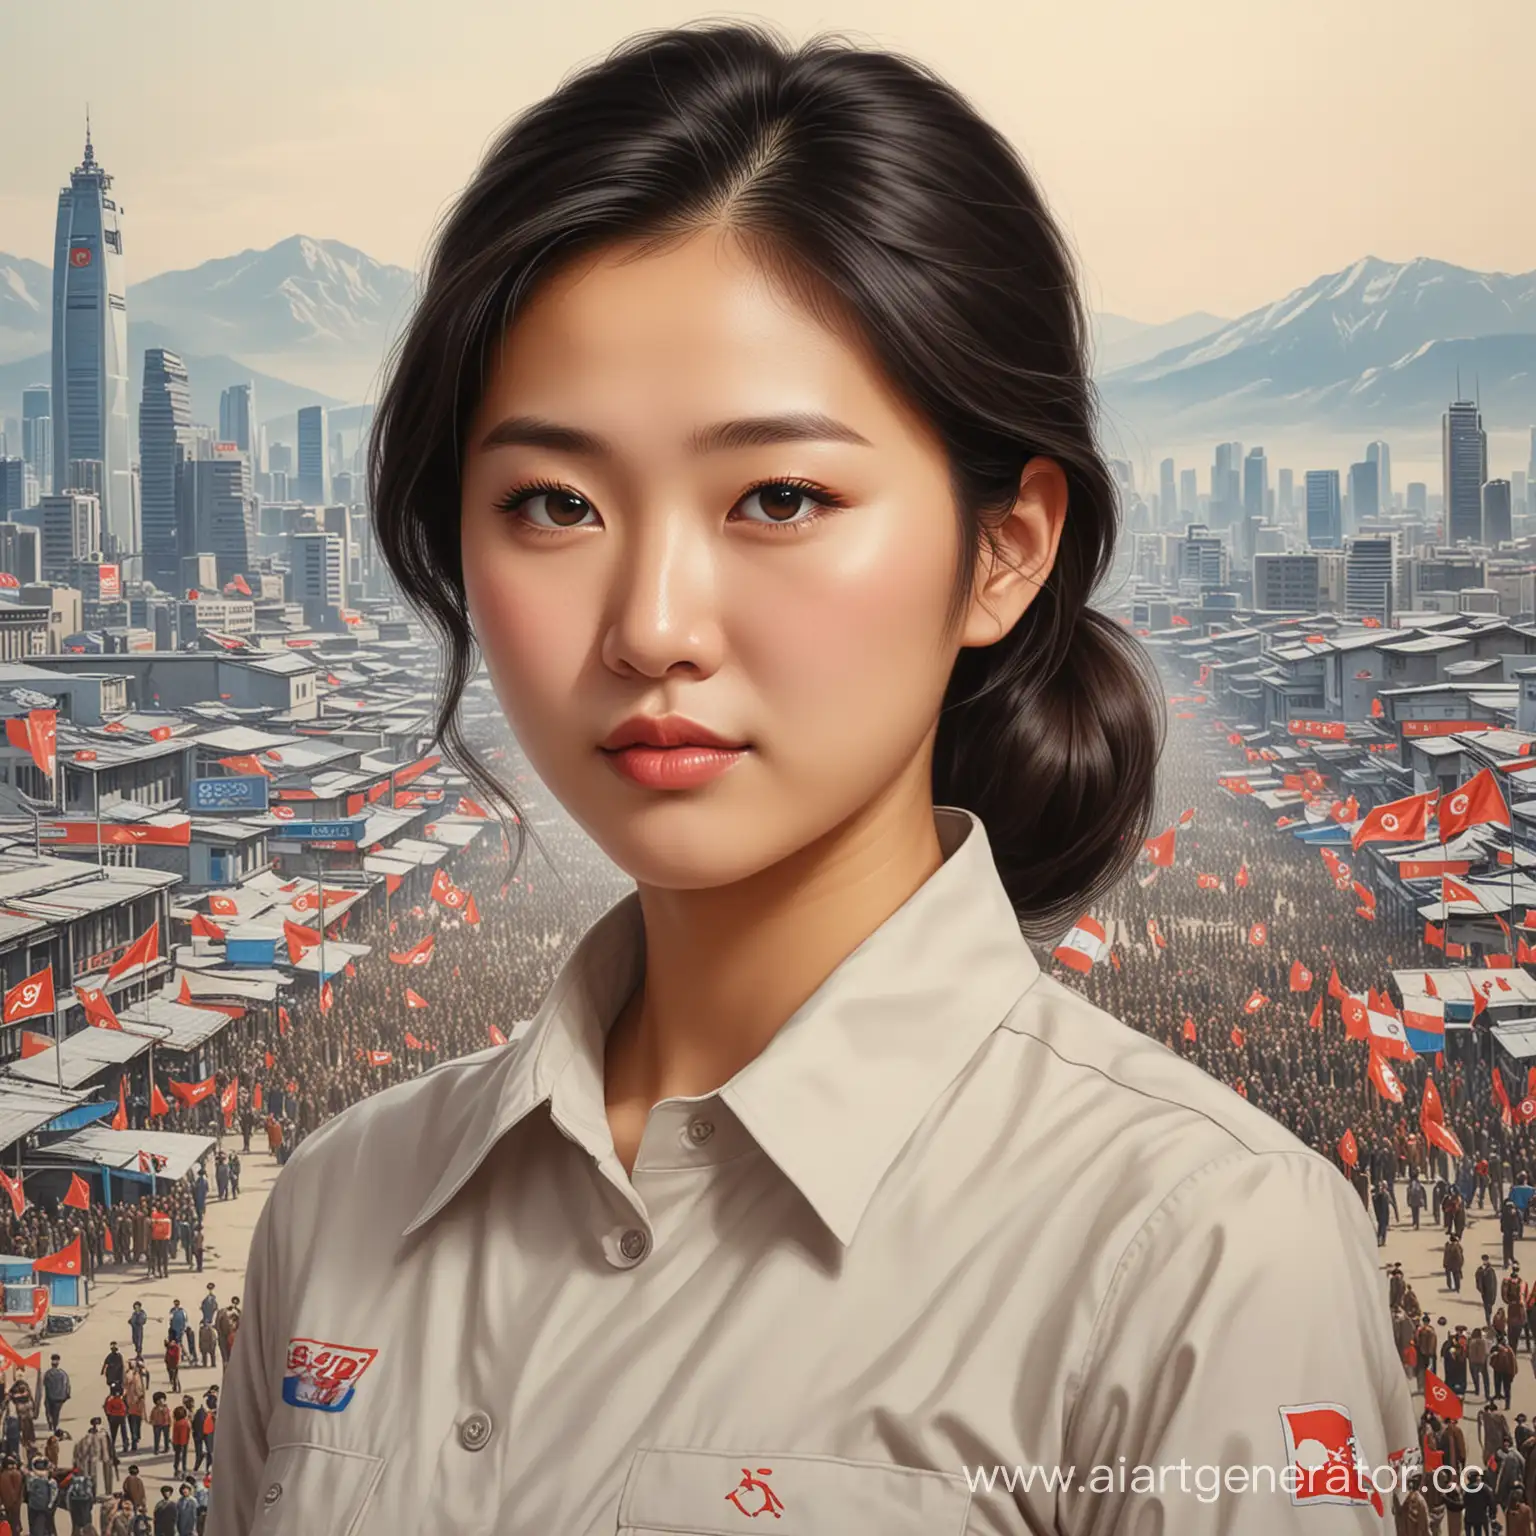 Future-Vision-Korean-Woman-and-Workers-Party-Member-in-Detailed-DPRK-Landscape